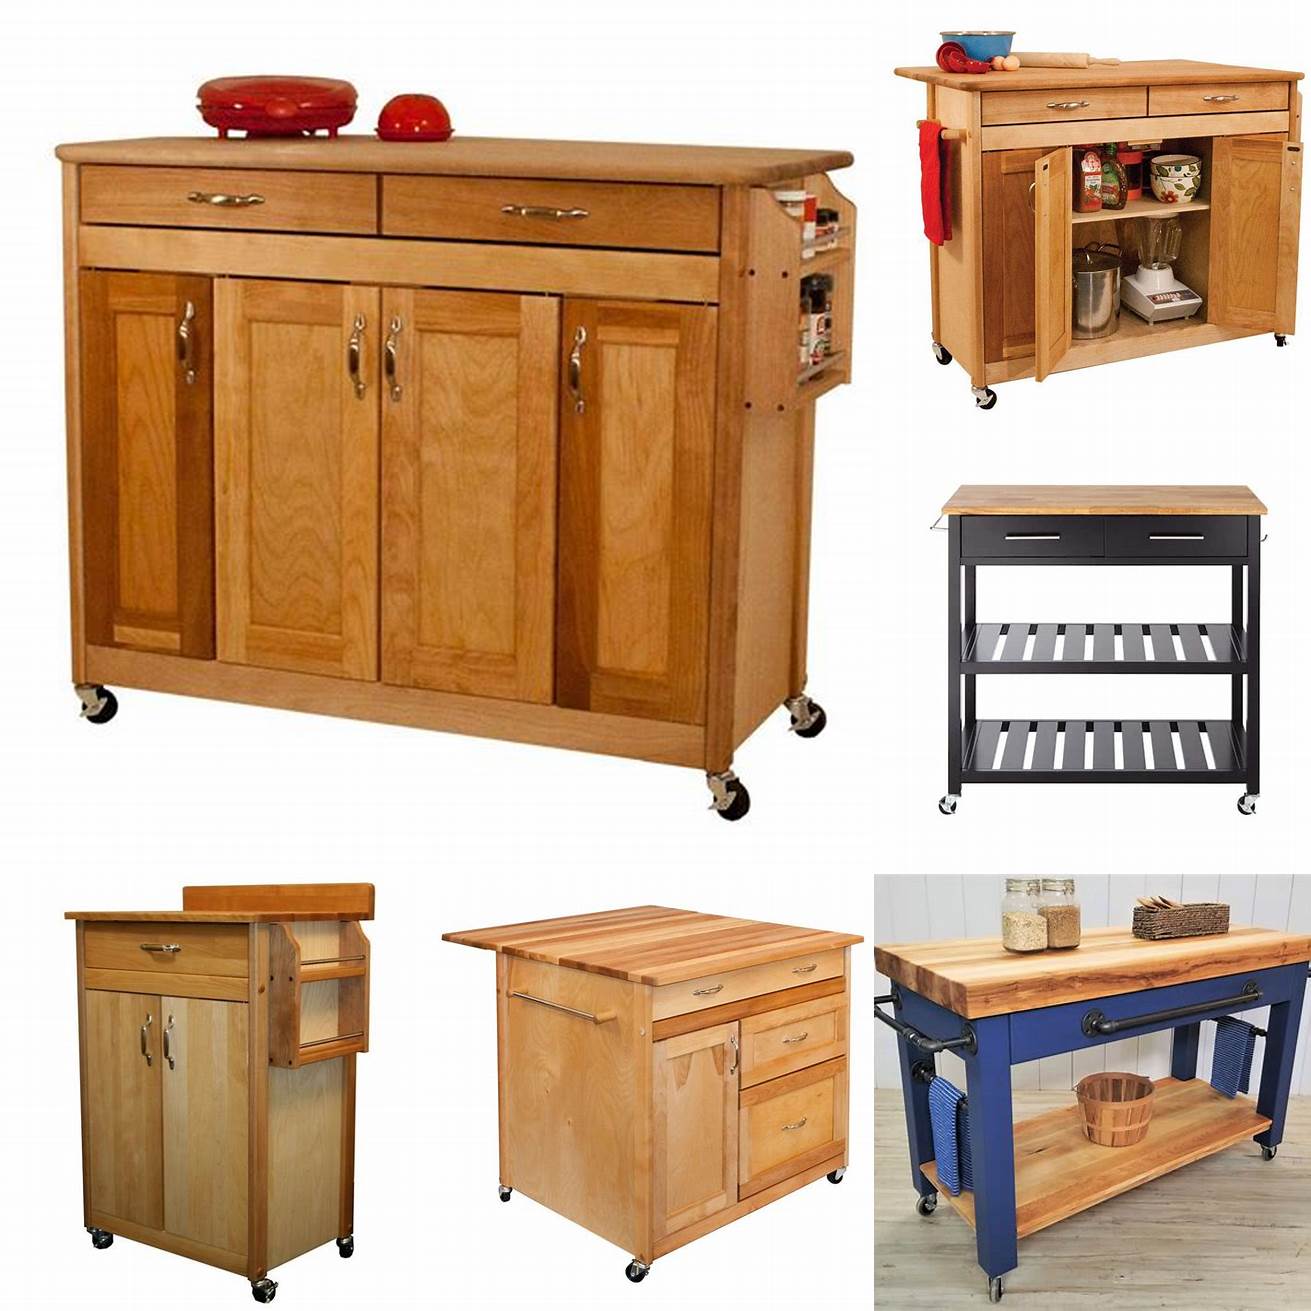 Butcher block kitchen cart with drawers and cabinets